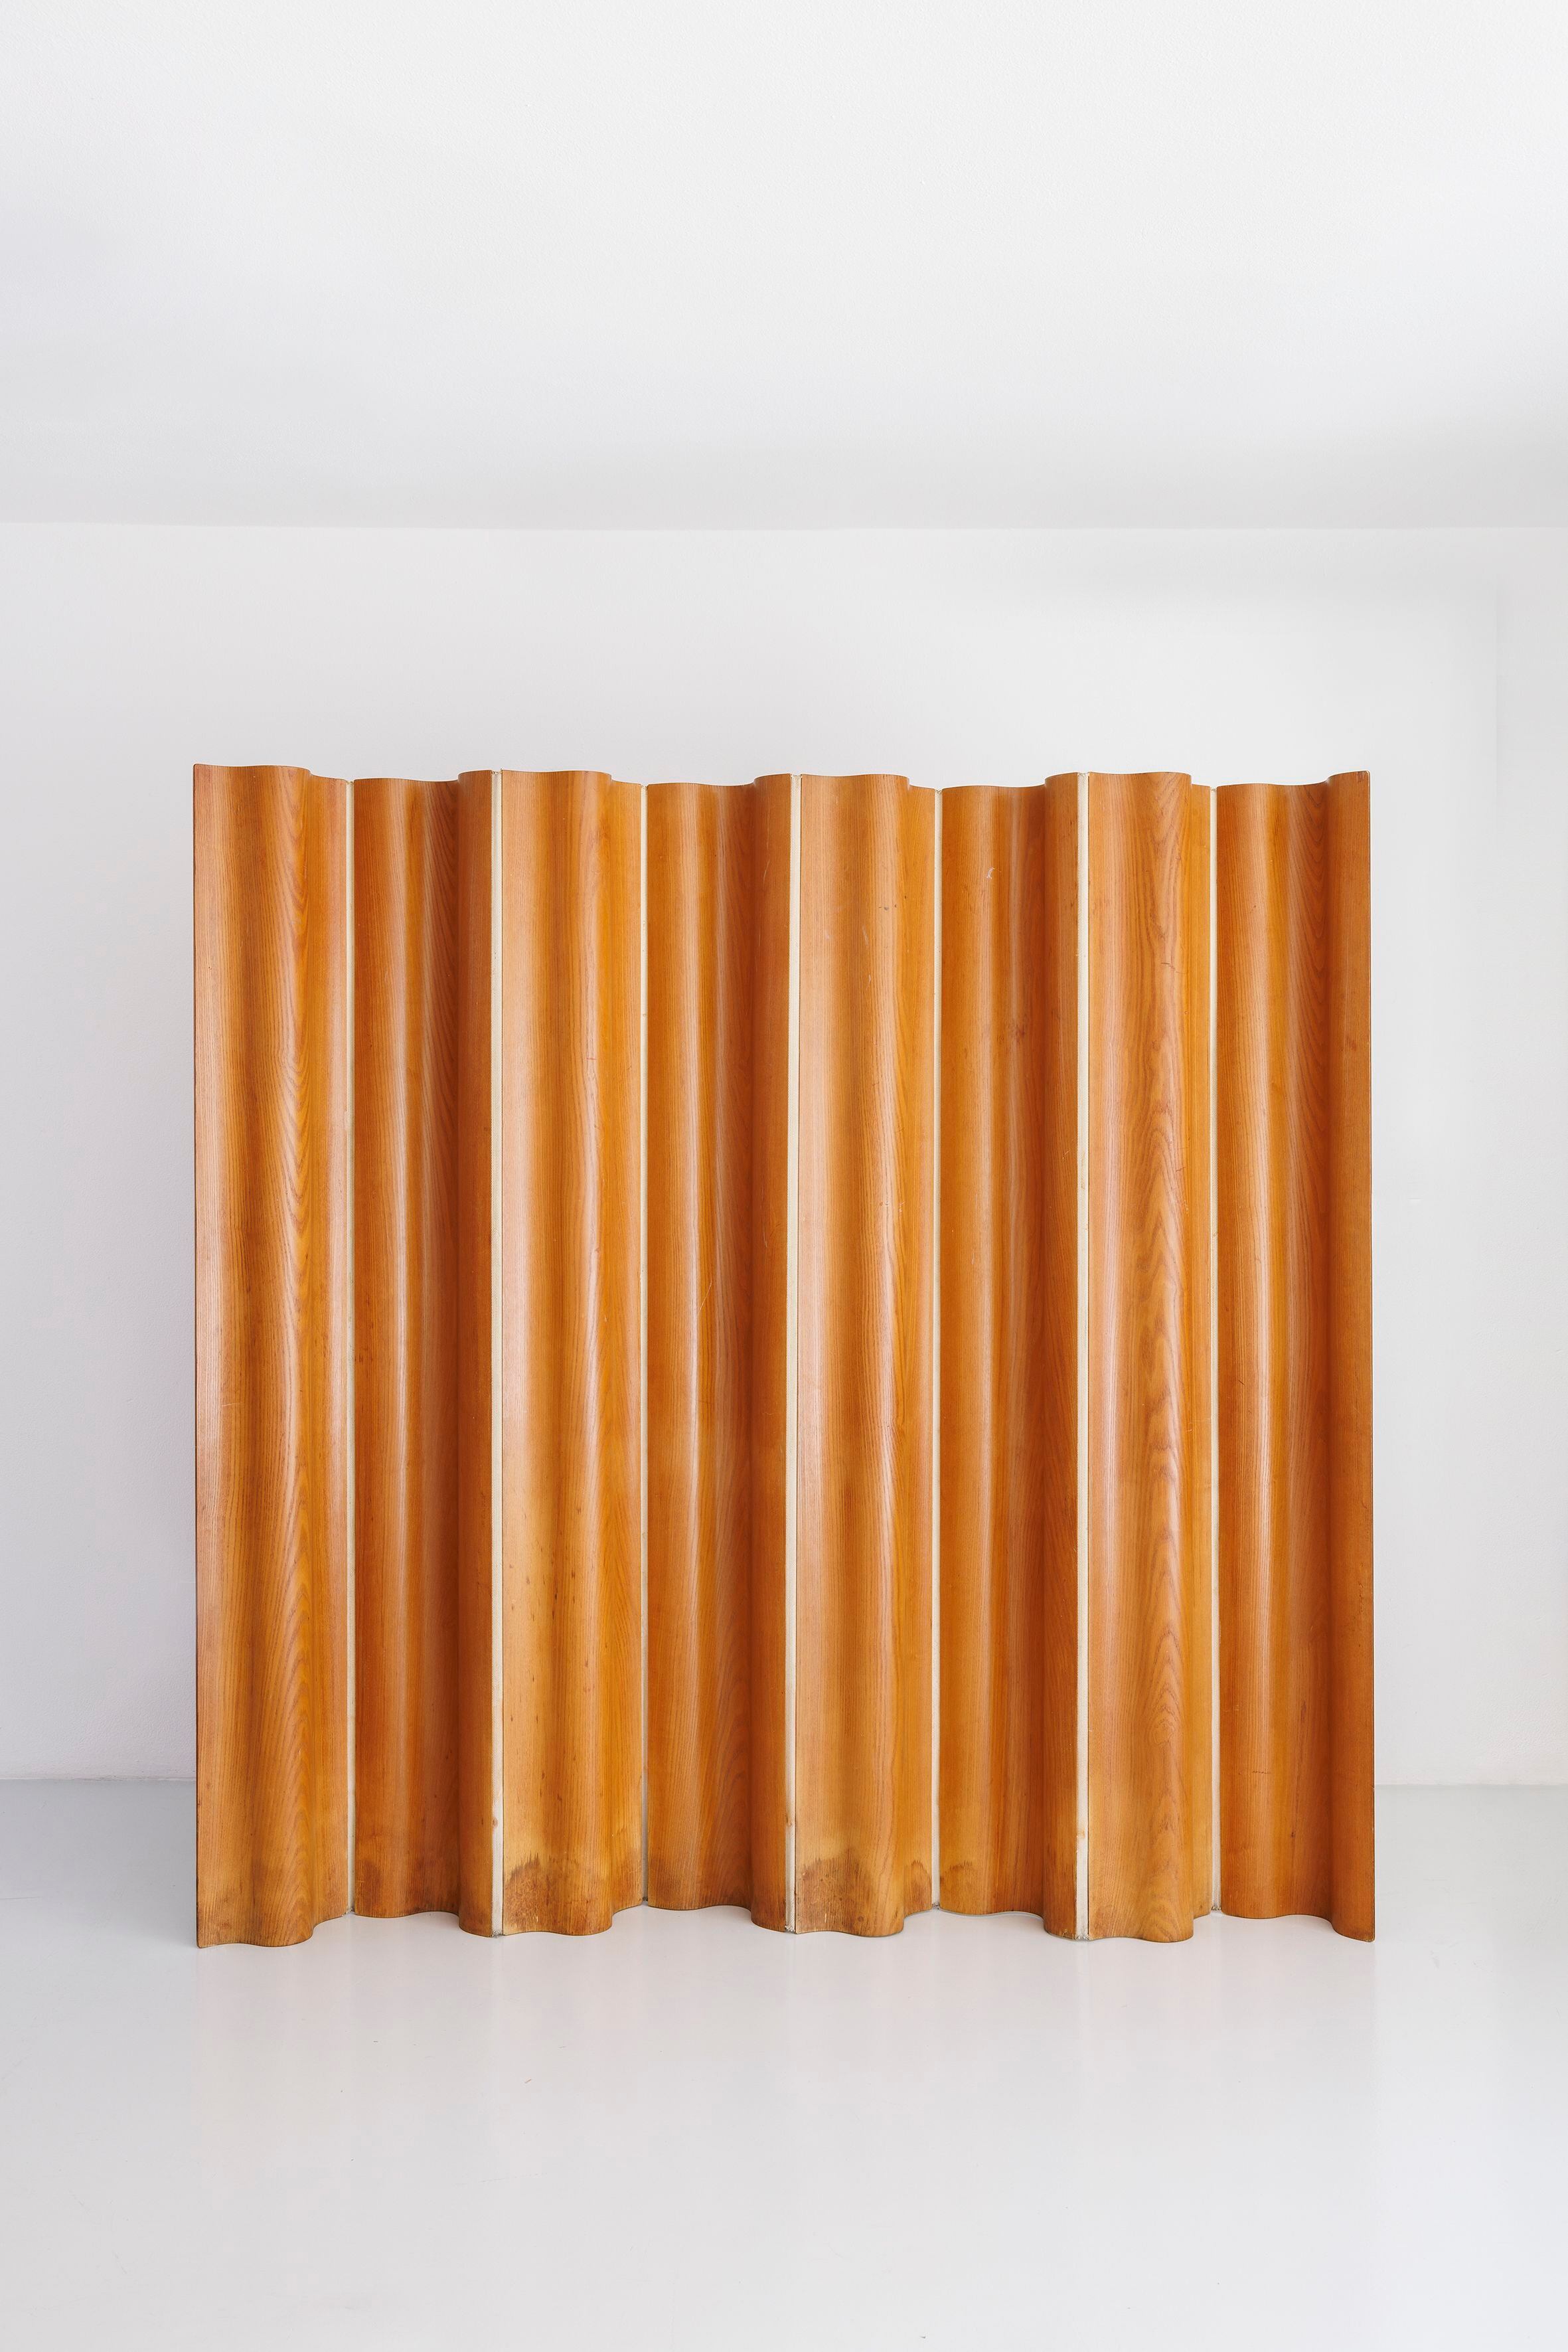 'Folding Screen FSW 8', de Charles and Ray Eames (1948).